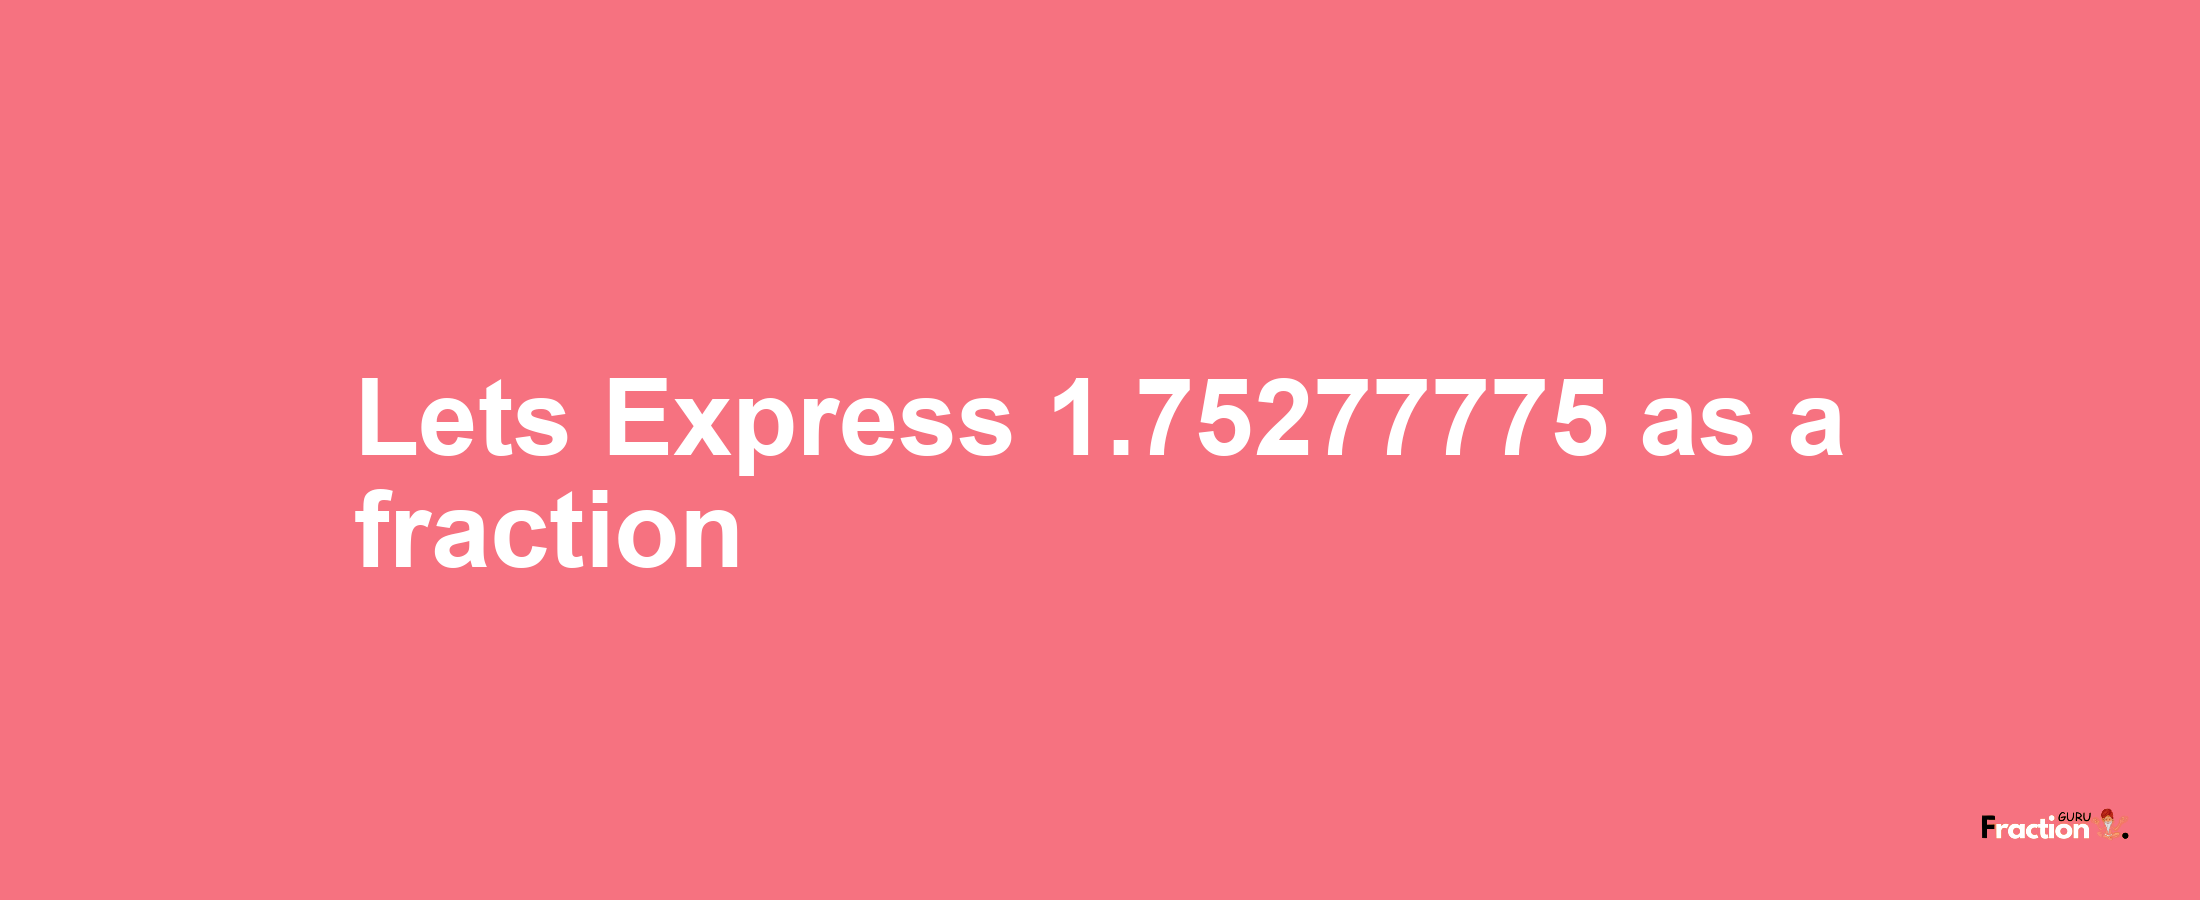 Lets Express 1.75277775 as afraction